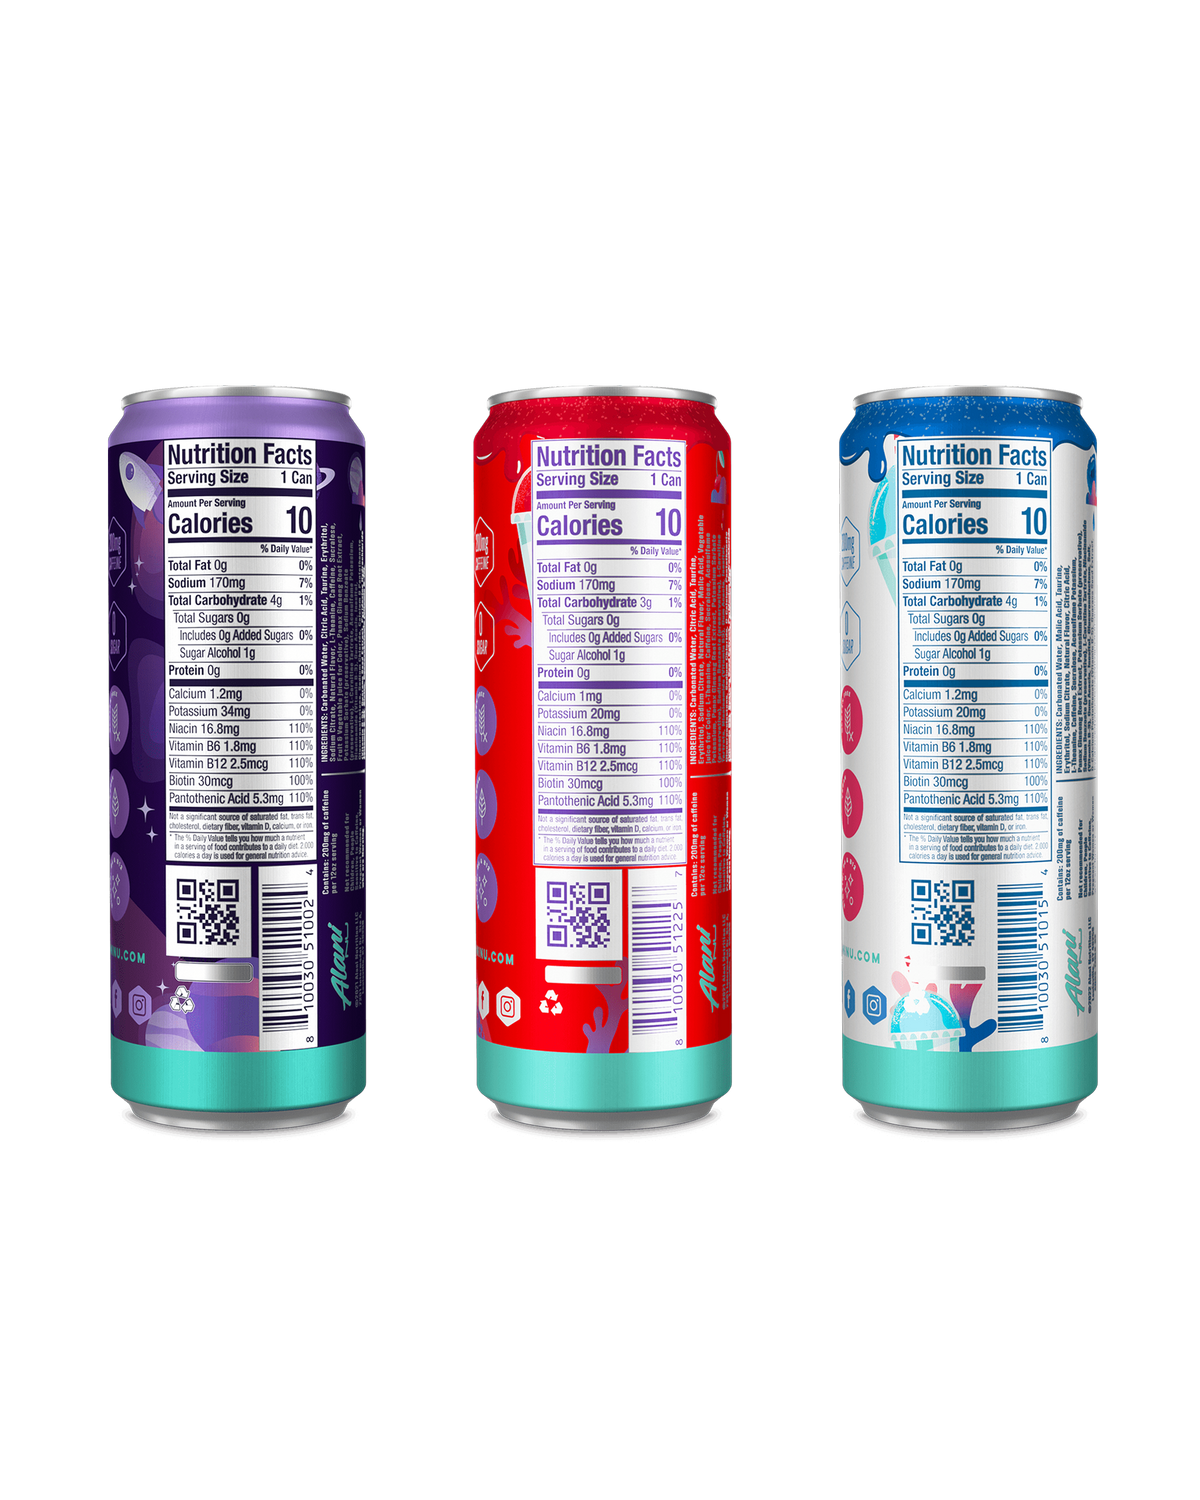 A back view of Energy drinks in Electric Energy flavor highlighting nutrition facts.